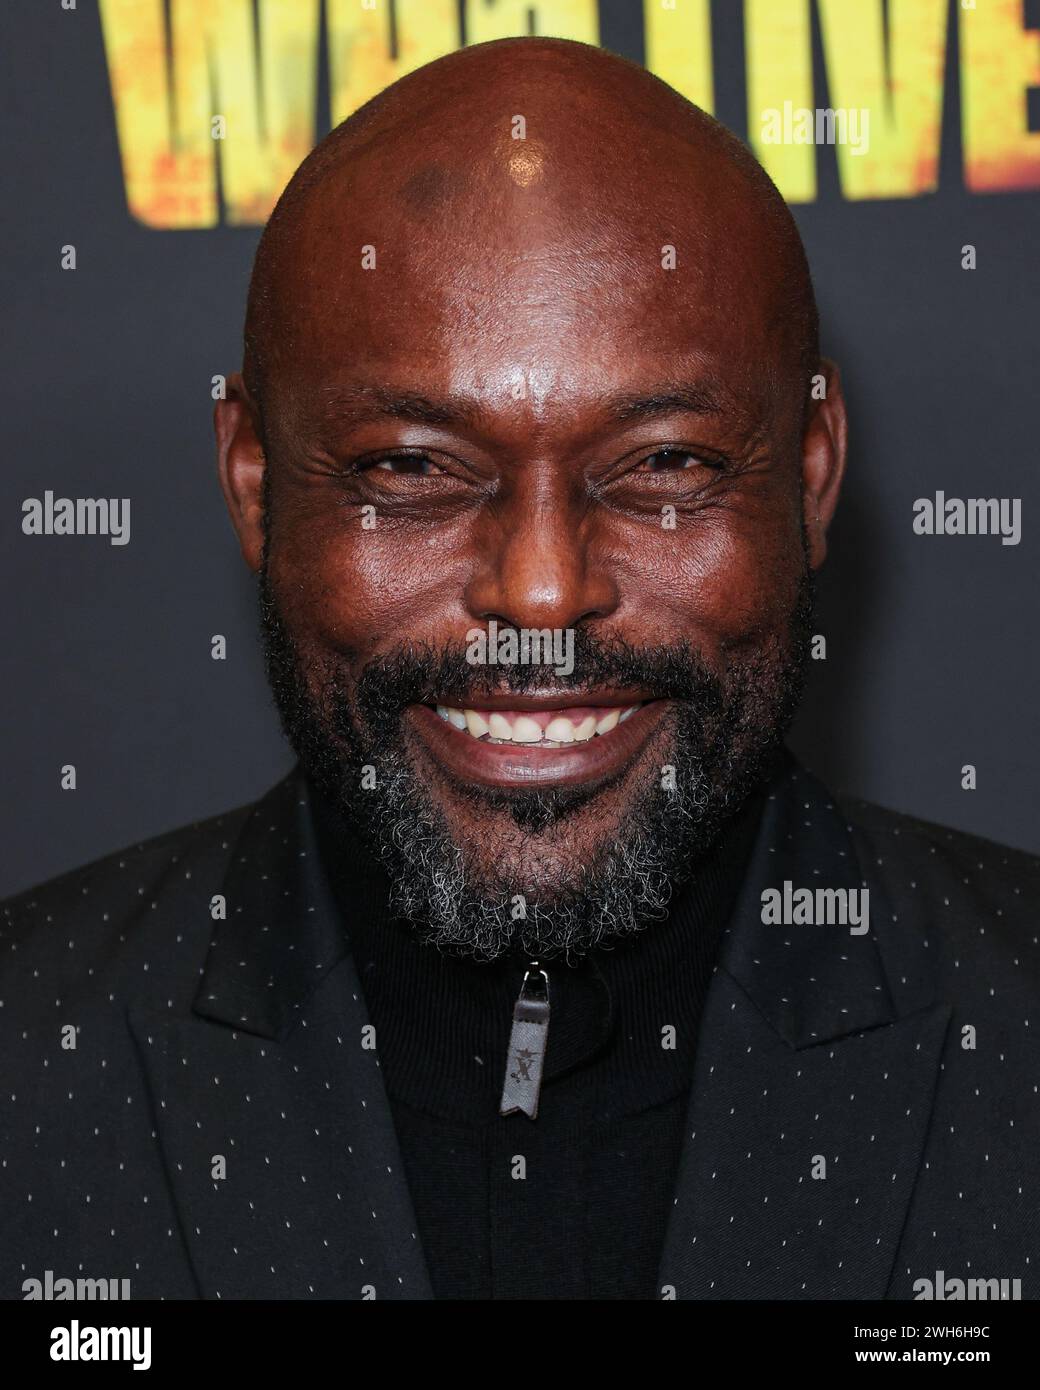 HOLLYWOOD, LOS ANGELES, KALIFORNIEN, USA - FEBRUAR 07: Jimmy Jean-Louis kommt zur Los Angeles Premiere von AMC+'s The Walking Dead: the Ones Who Live' Staffel 1 fand am 7. Februar 2024 im Linwood Dunn Theater im Pickford Center for Motion Picture Study in Hollywood, Los Angeles, Kalifornien, USA statt. (Foto: Xavier Collin/Image Press Agency) Stockfoto